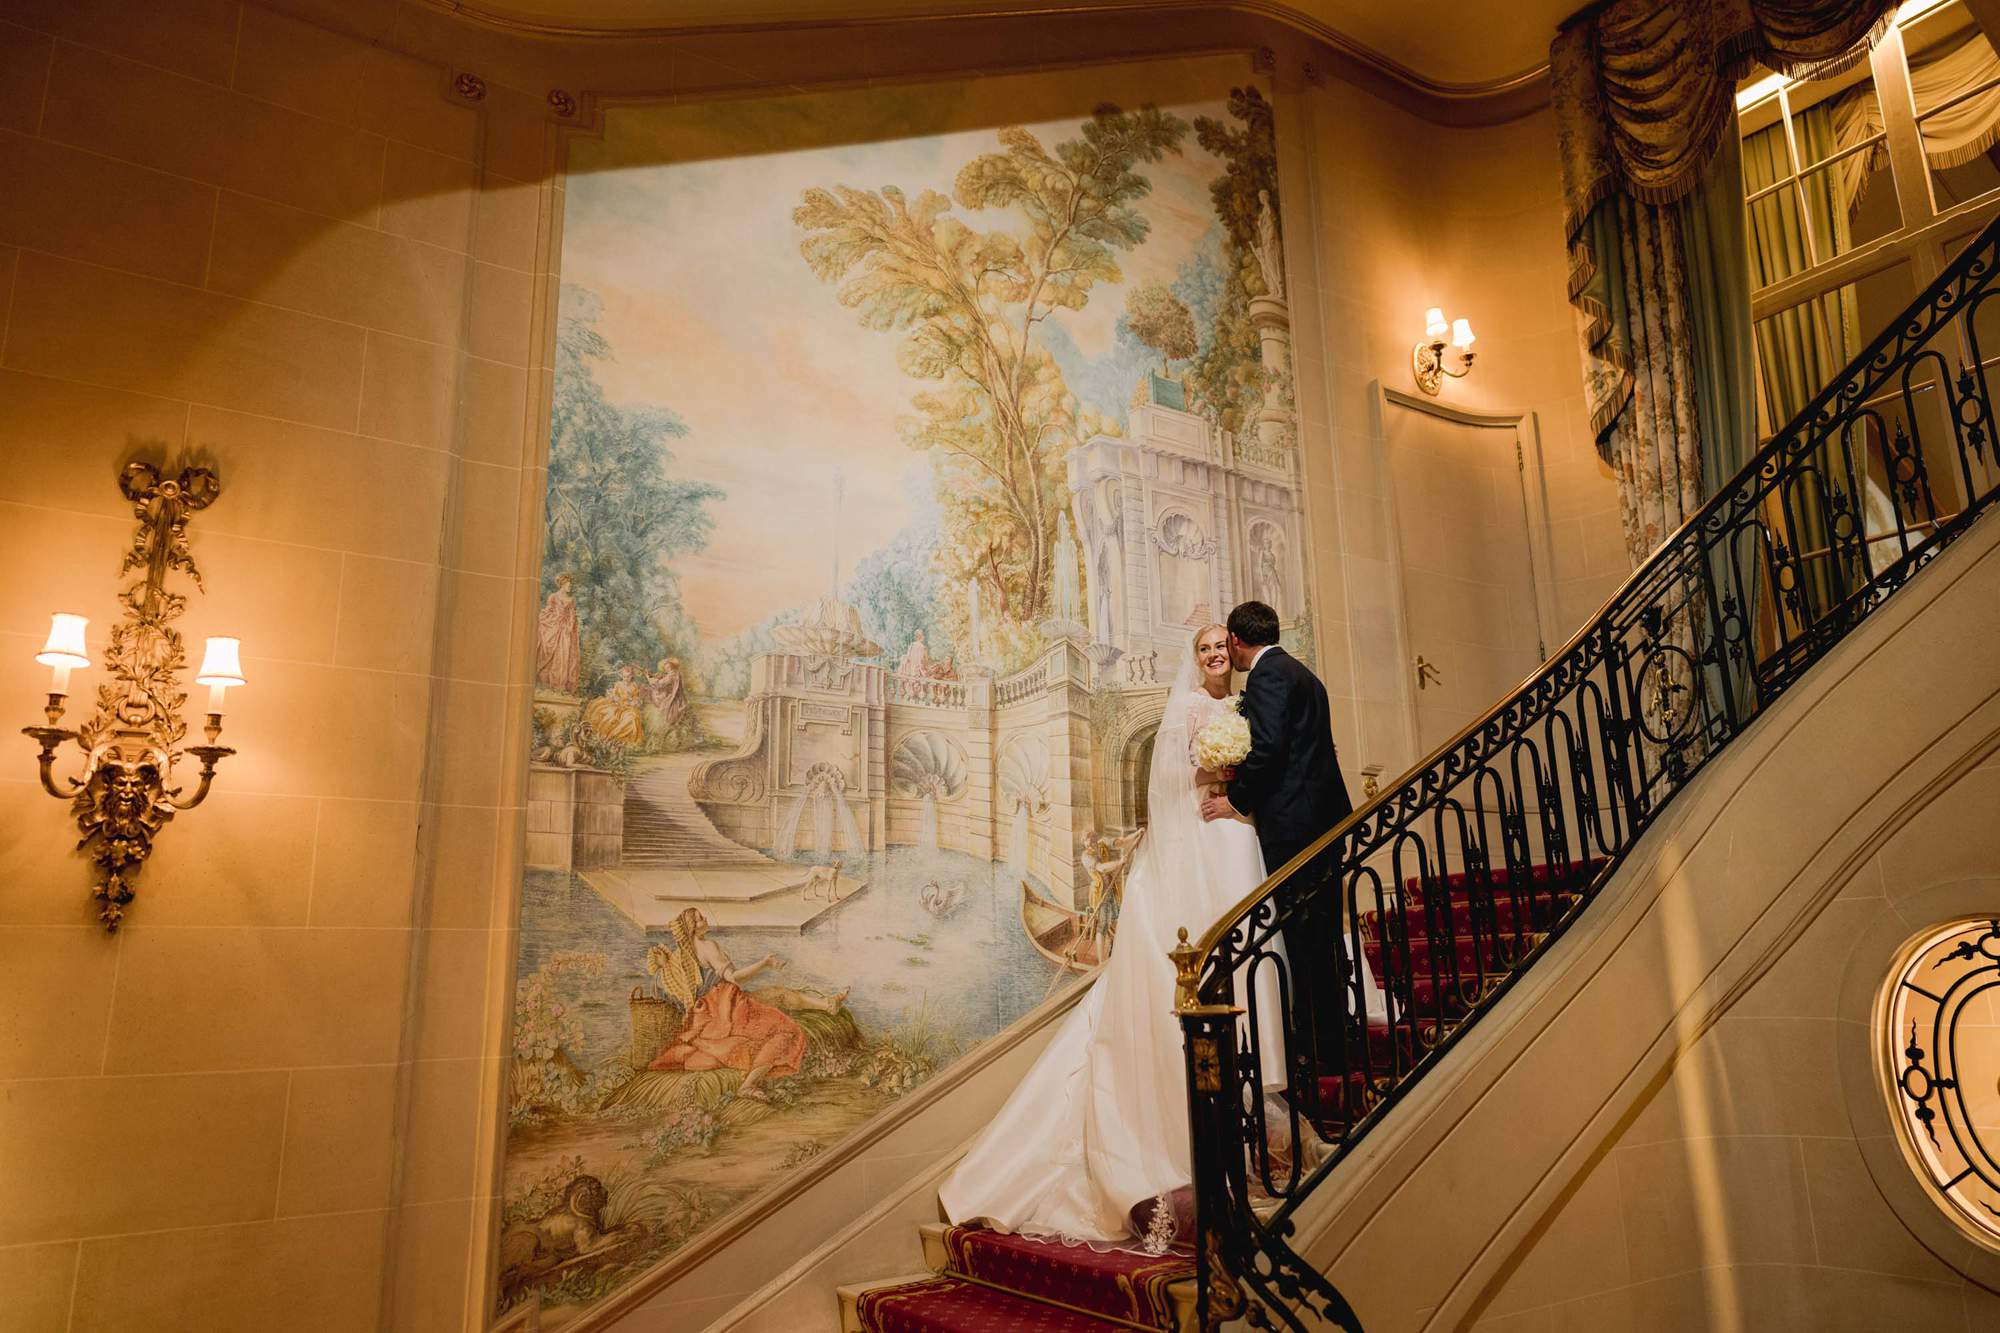 Bride and groom cuddle on the staircase on their wedding day at the Ritz hotel in London.